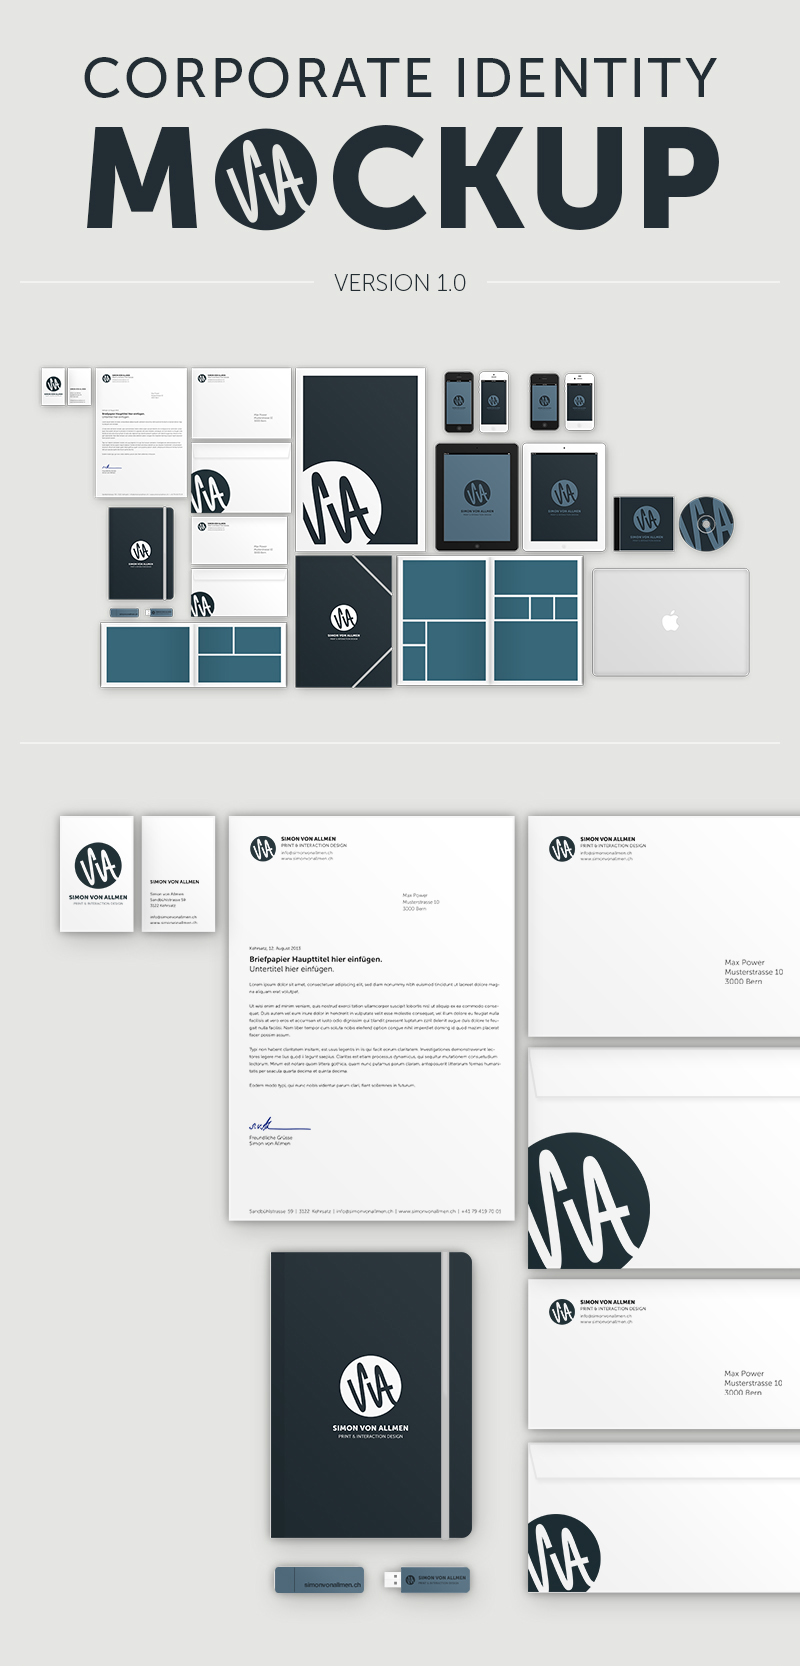 Mockup psd free photoshop mock up corporate download